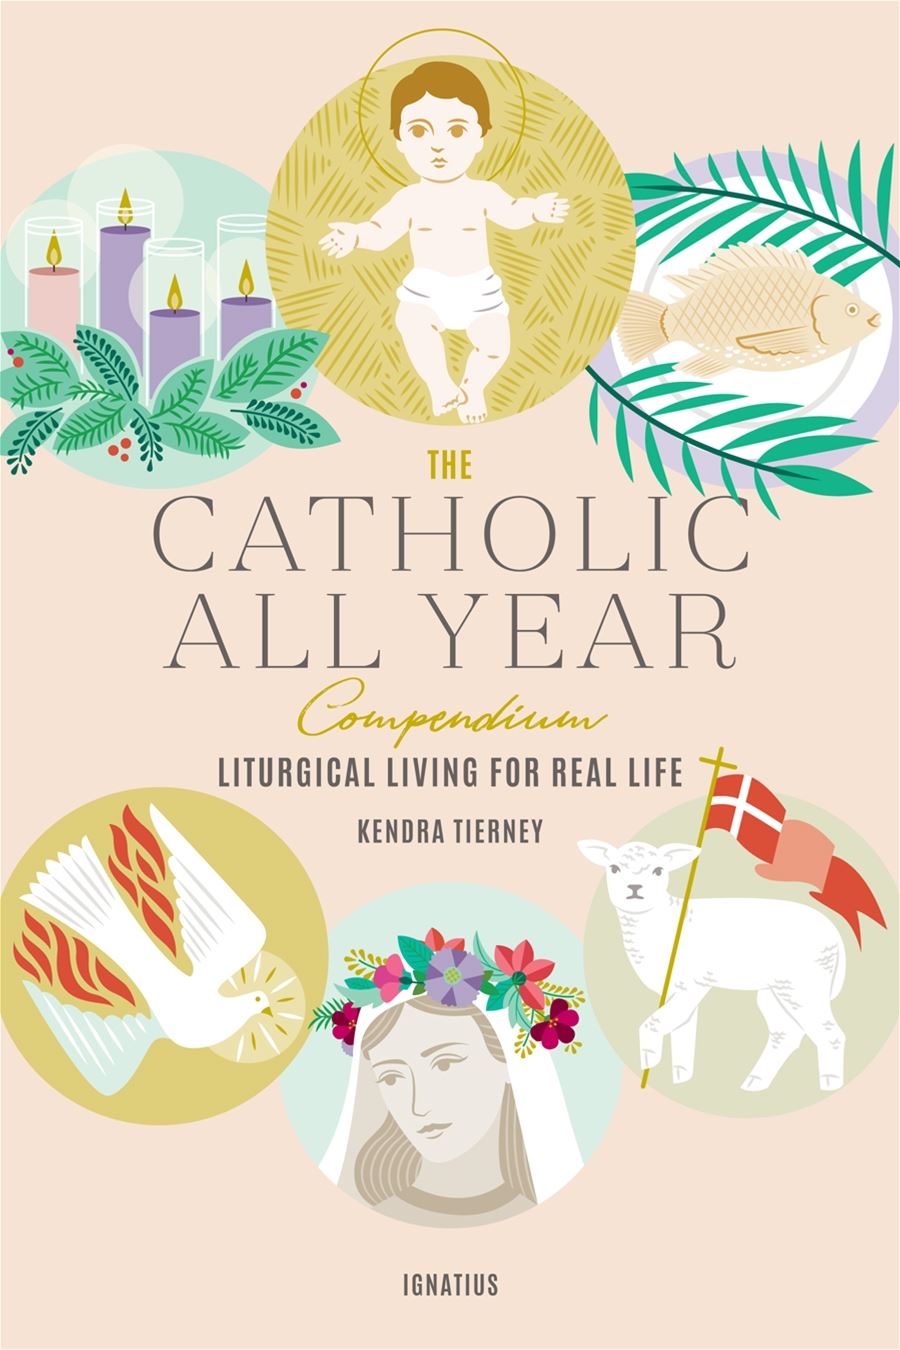 The Catholic All Year Compendium Liturgical Living for Real Life By: Kendra Tierney